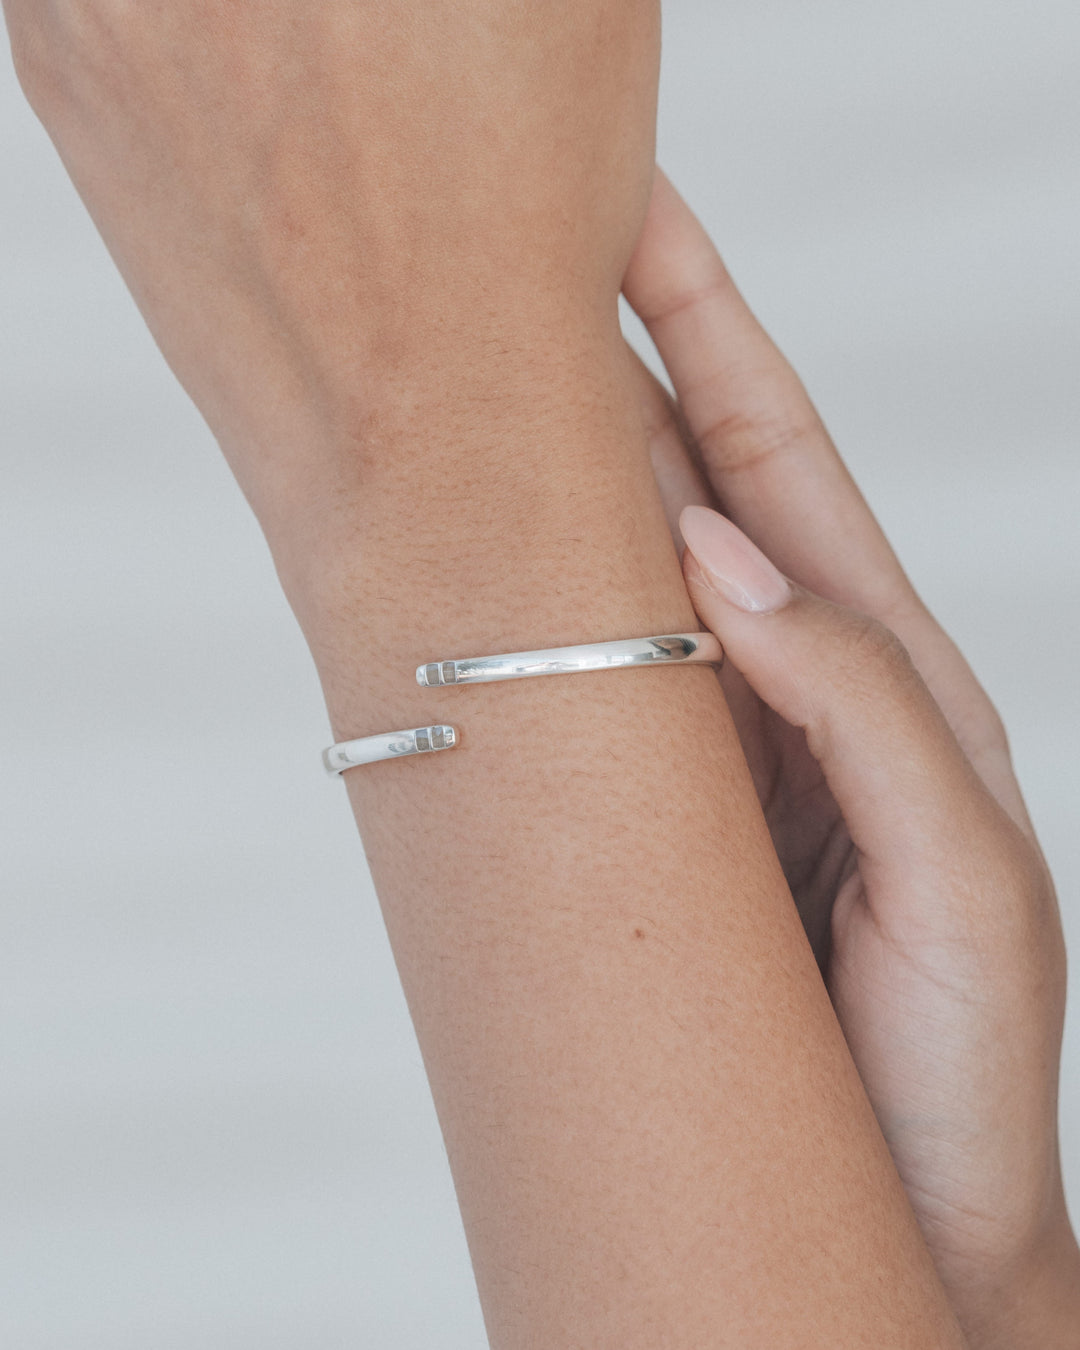 A photo of a woman holding up her wrist, on which she wears a memorial cuff hinged bypass style bracelet with ashes